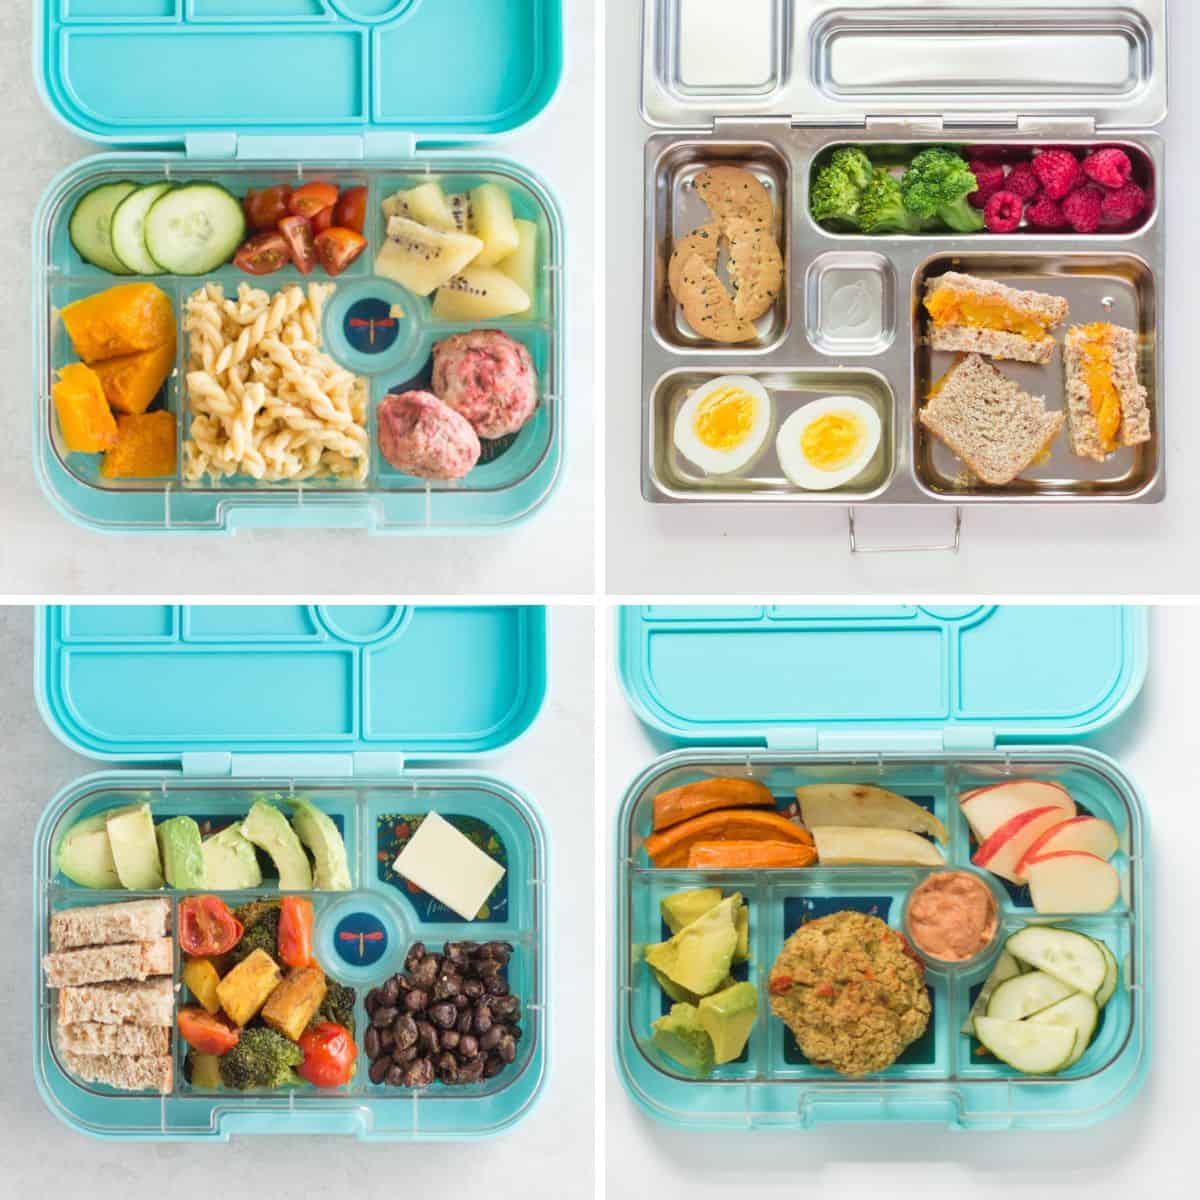 https://www.mjandhungryman.com/wp-content/uploads/2022/07/Bento-Box-Lunches-for-kids.jpg